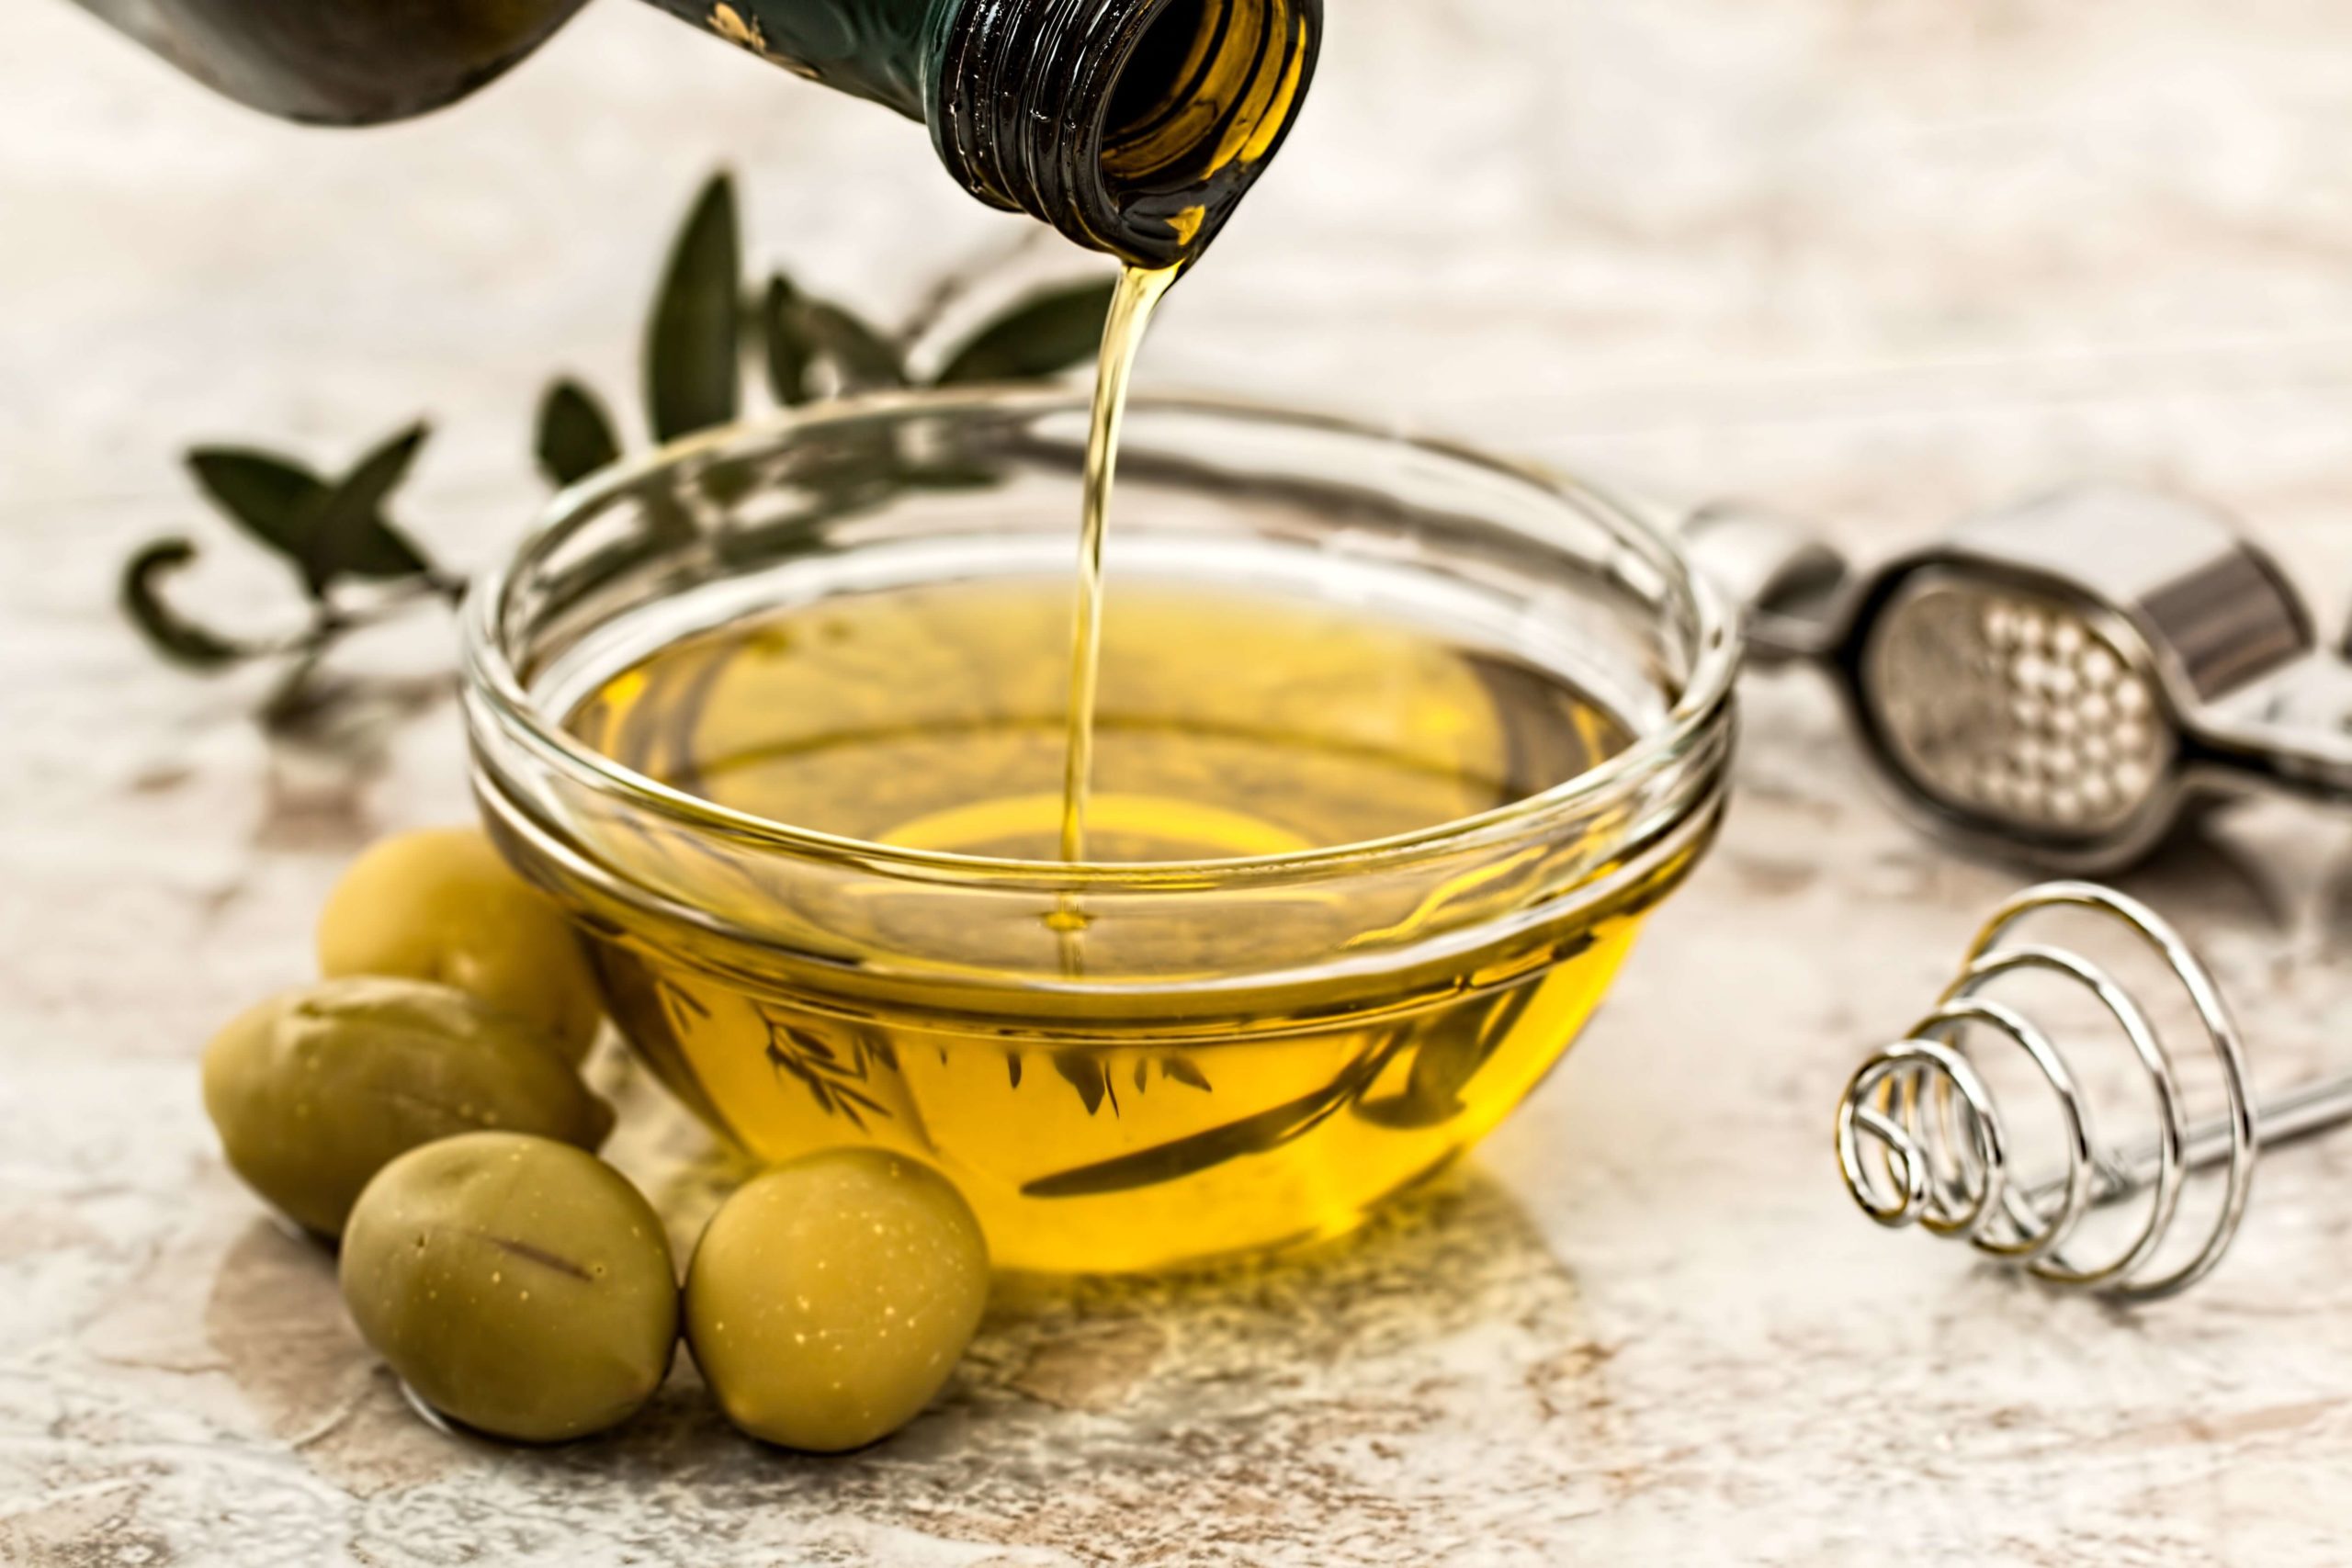 chania olive oil | greeceFoodies